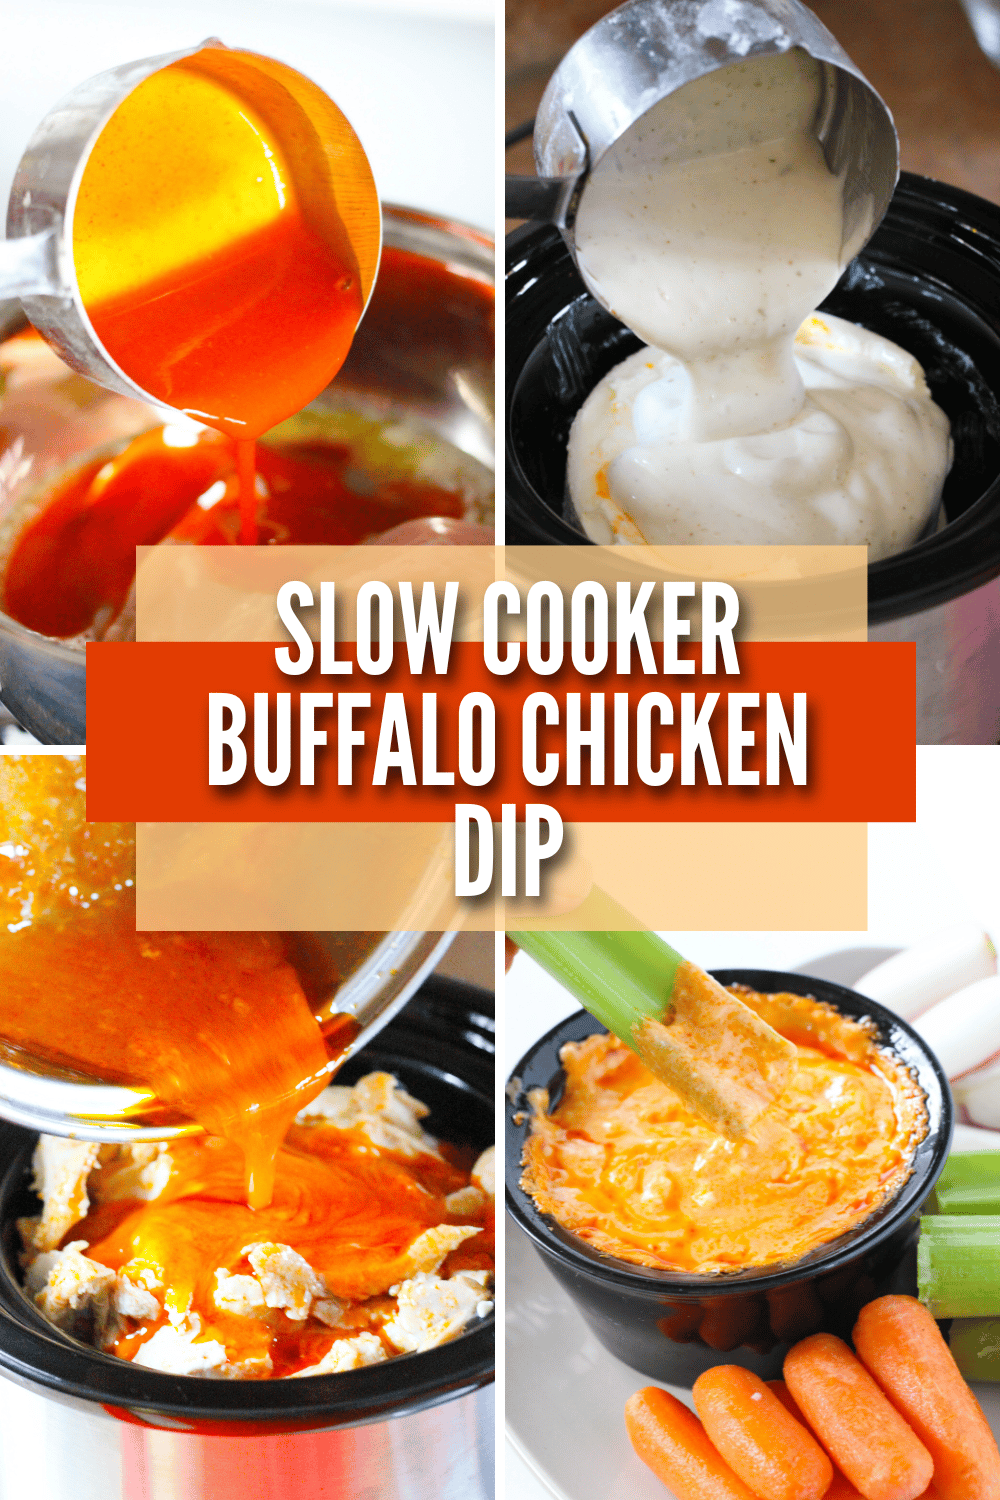 This Slow Cooker Buffalo Chicken Dip is the perfect game-day appetizer! It’s so easy to make and always a hit with family and friends. #slowcooker #buffalochickendip #appetizer #gamedayfood via @wondermomwannab